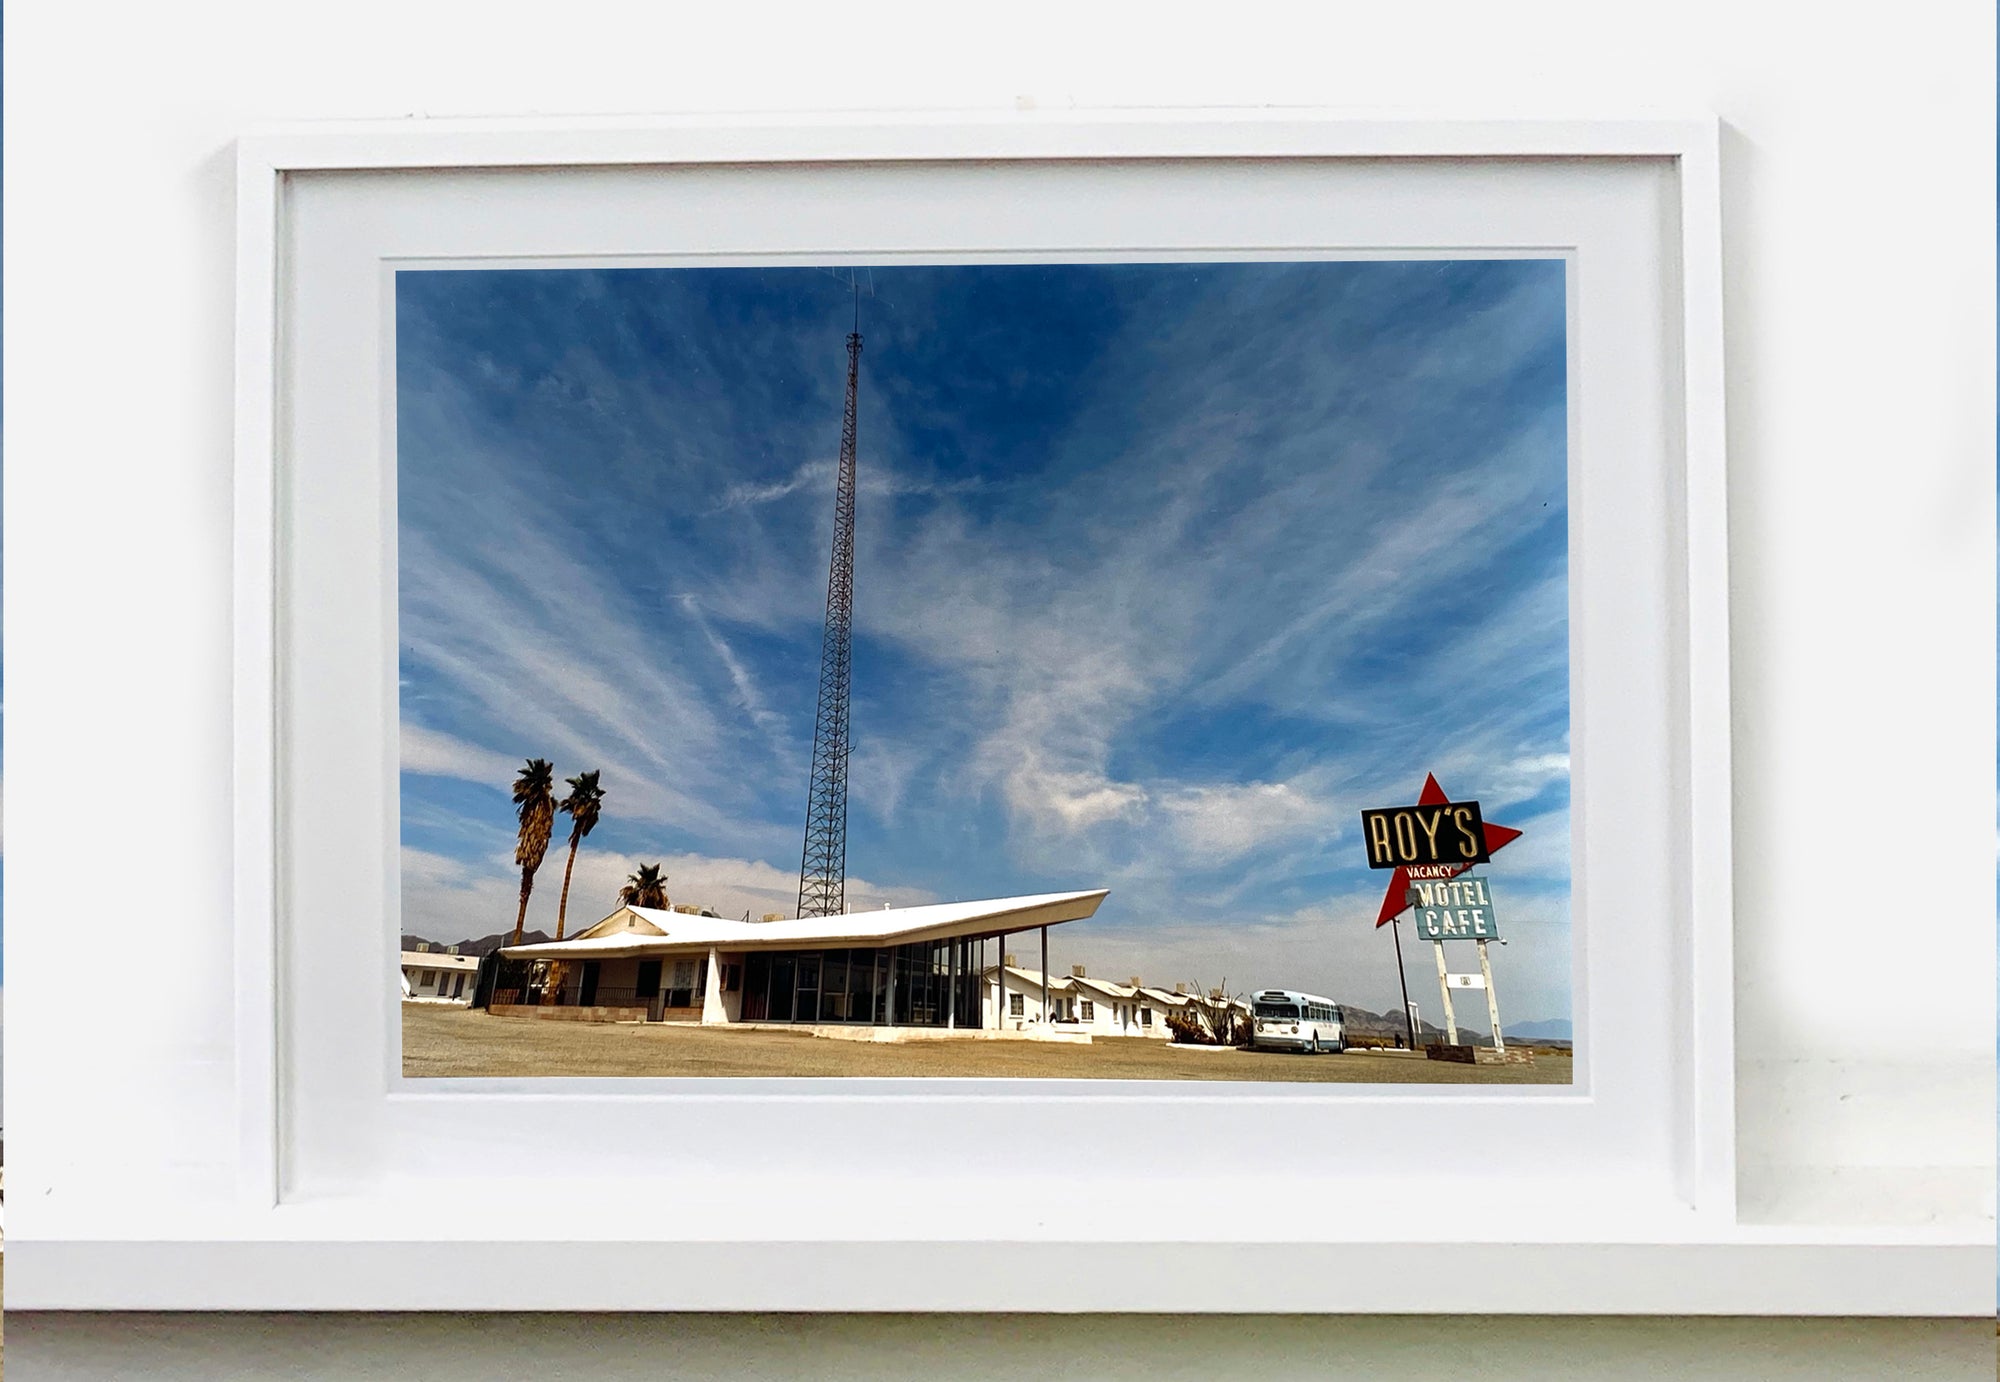 This view of Roy's Motel emphasises the space age Googie style of both the building and the iconic Motel sign. This piece is part of Richard Heeps' 'Dream in Colour' series.